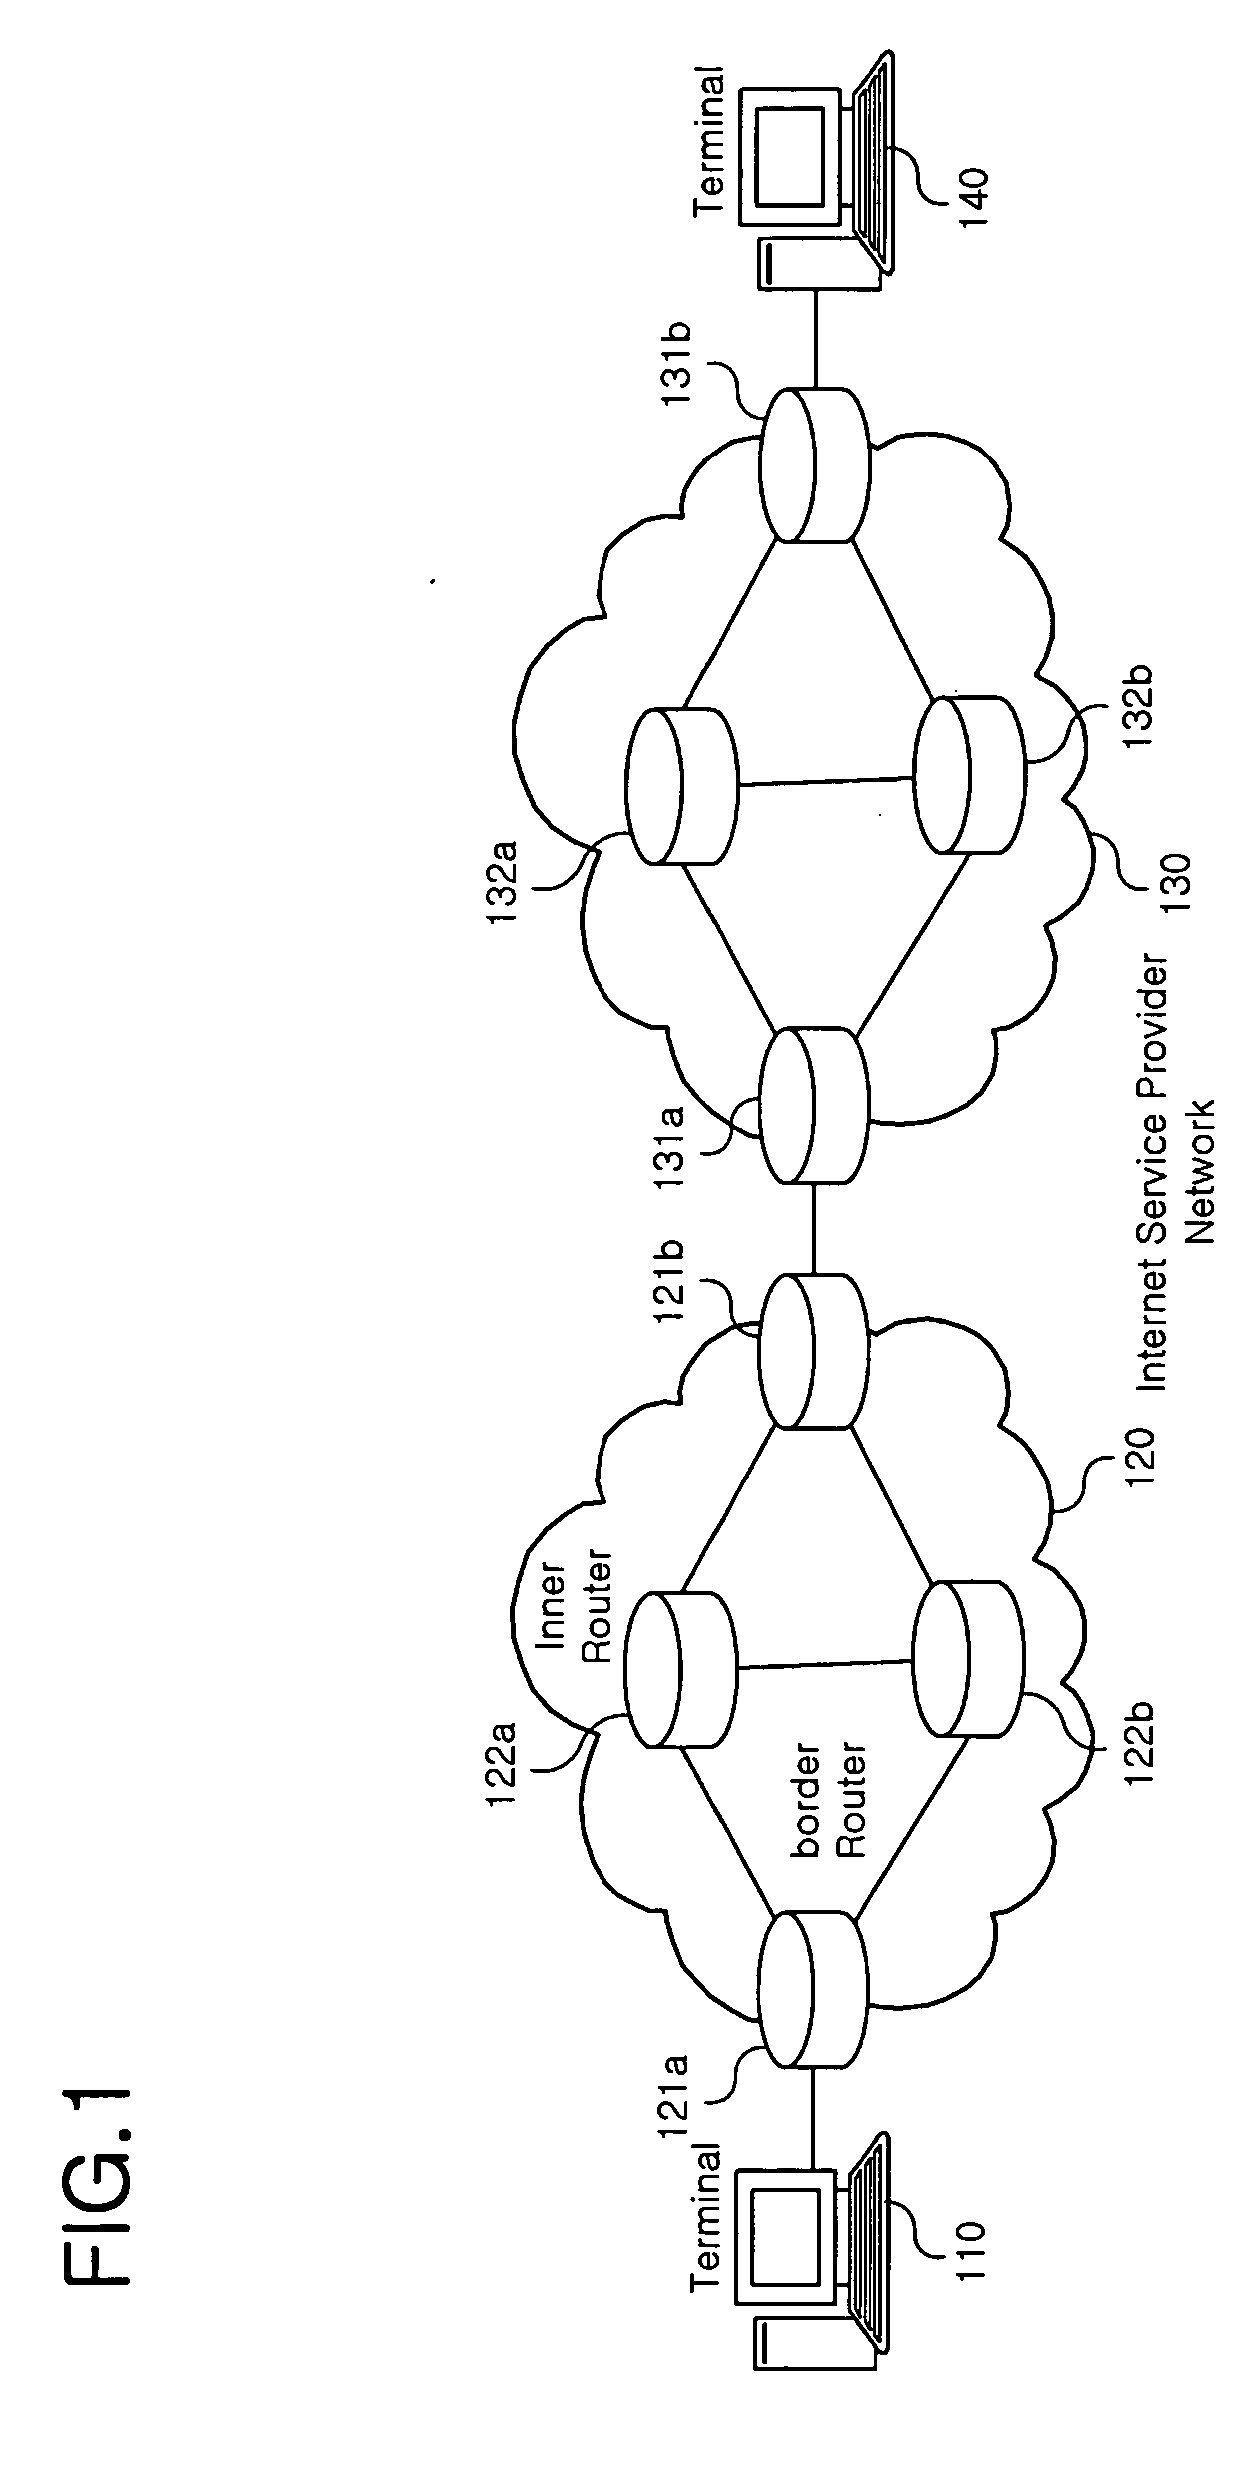 Resource allocation device for providing a differentiated service and a method thereof